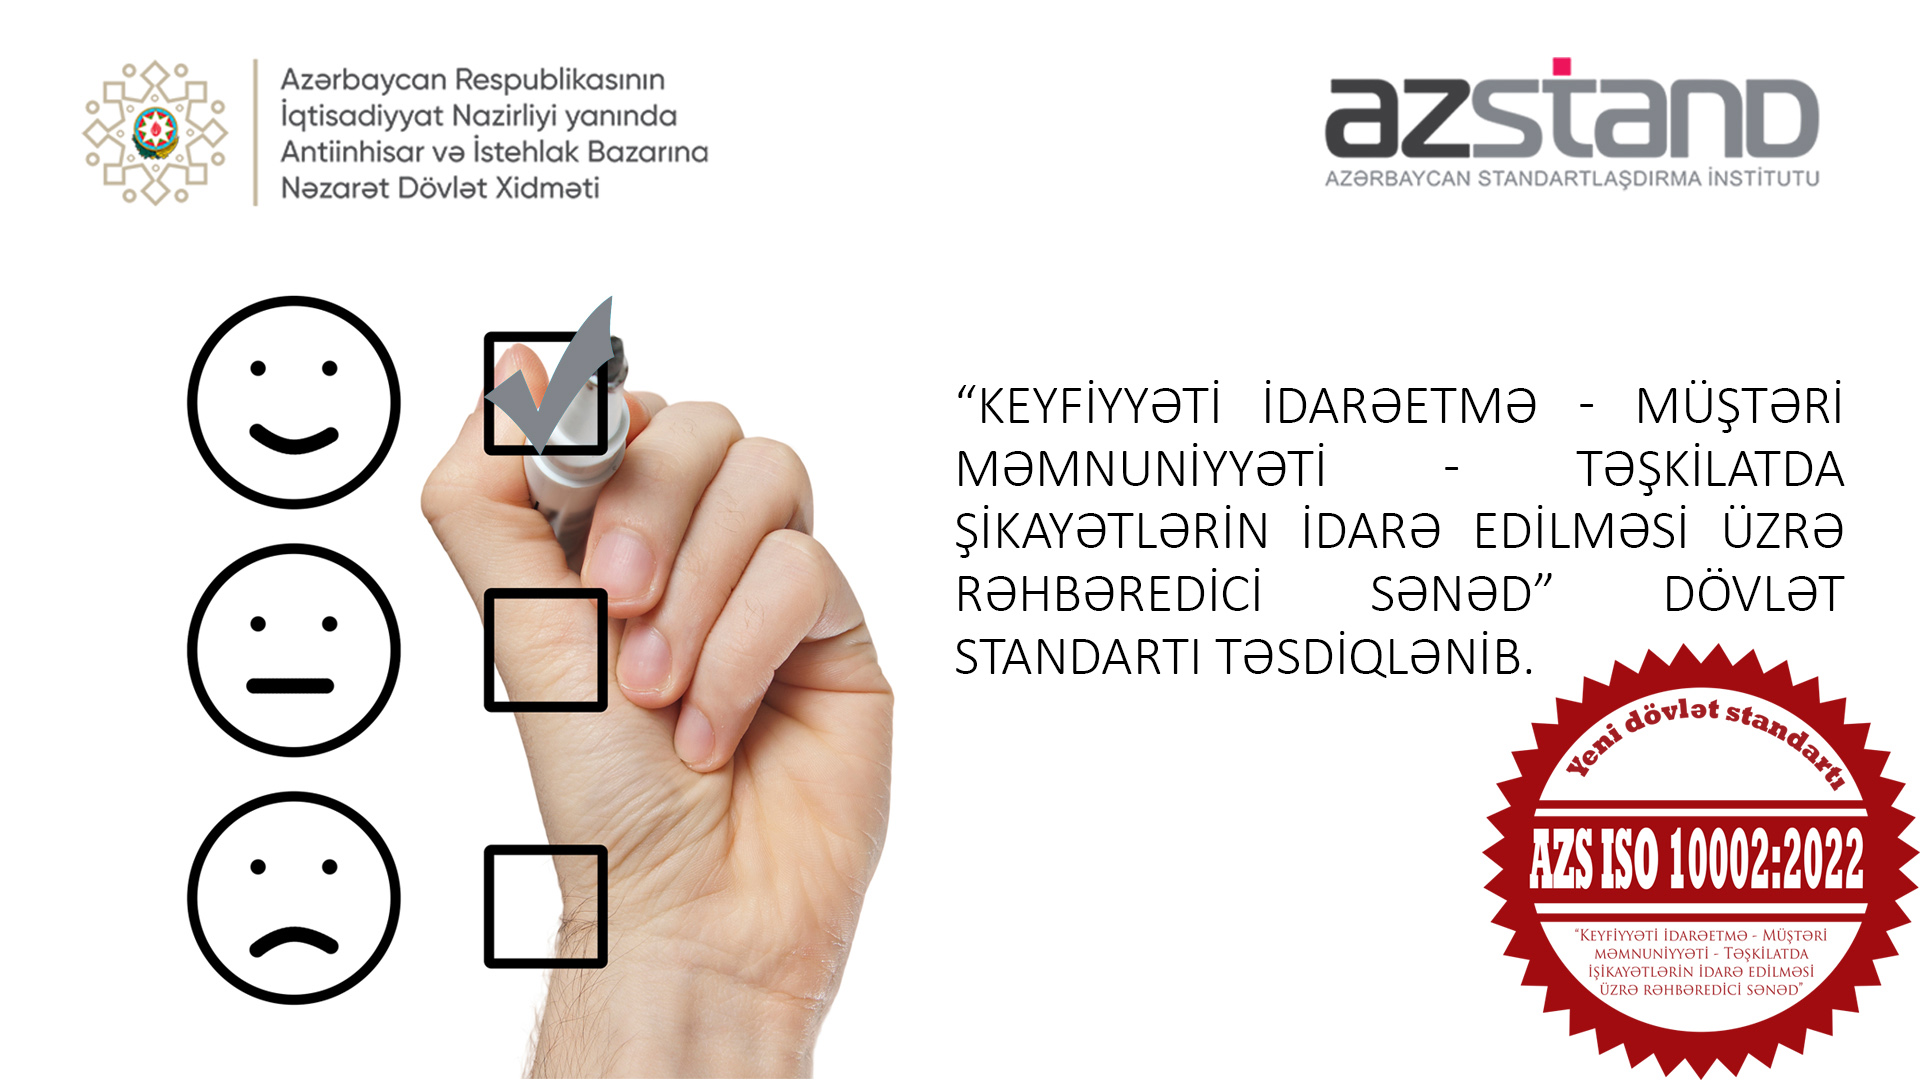 Relations between Azerbaijan and Kazakhstan are expanding in the field of standardization